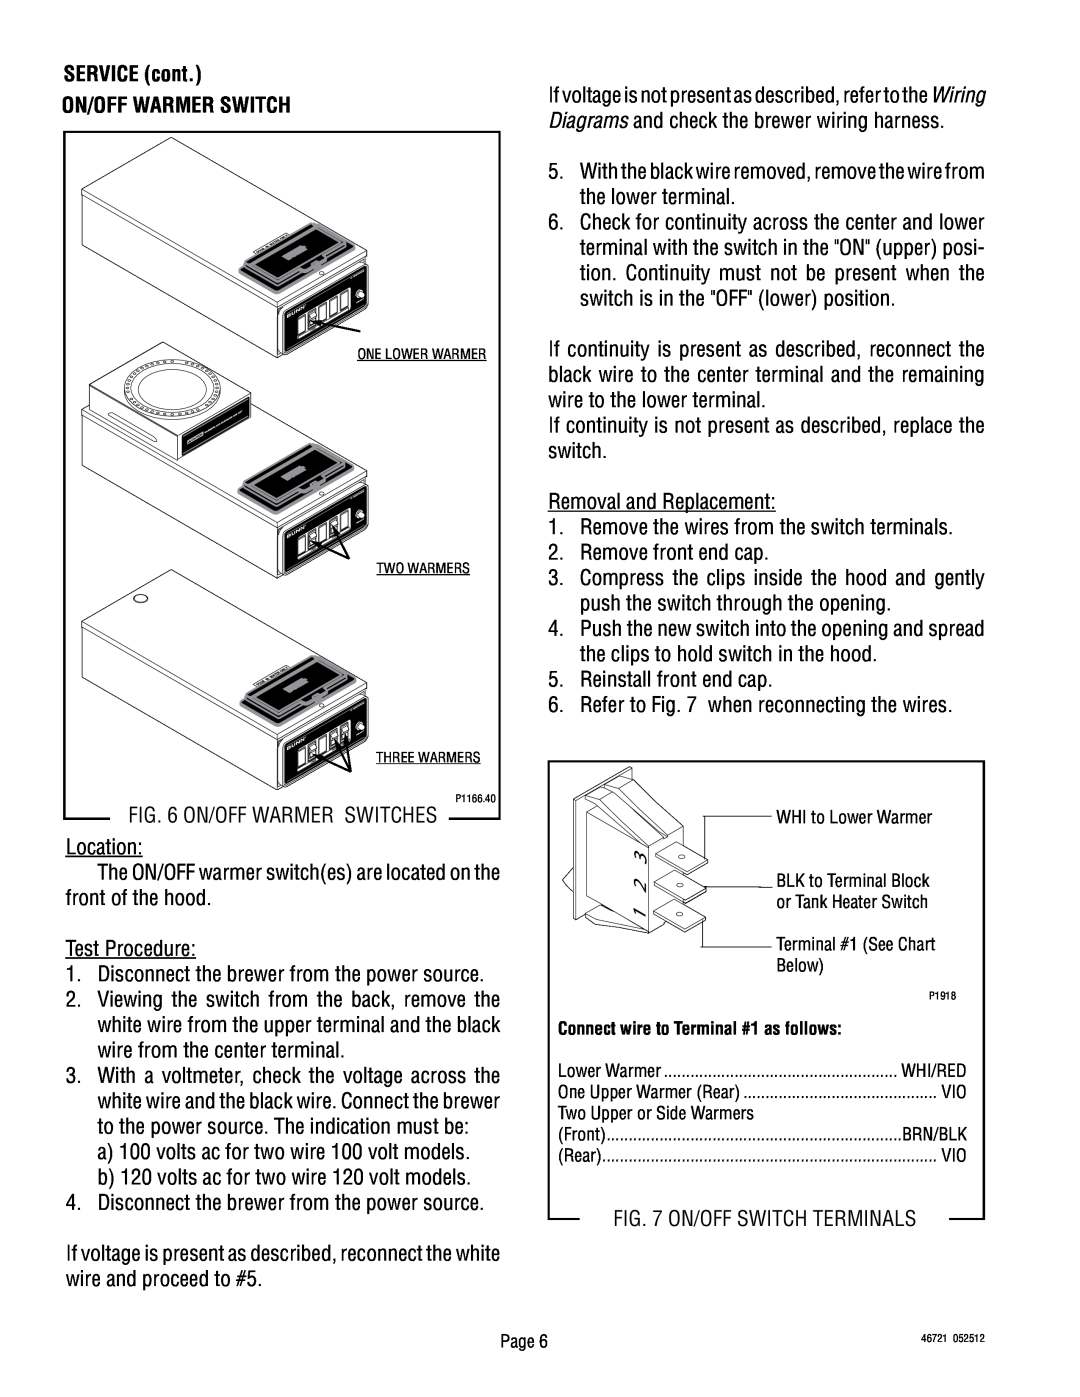 Bunn VP17 manual SERVICE cont ON/OFF WARMER SWITCH 